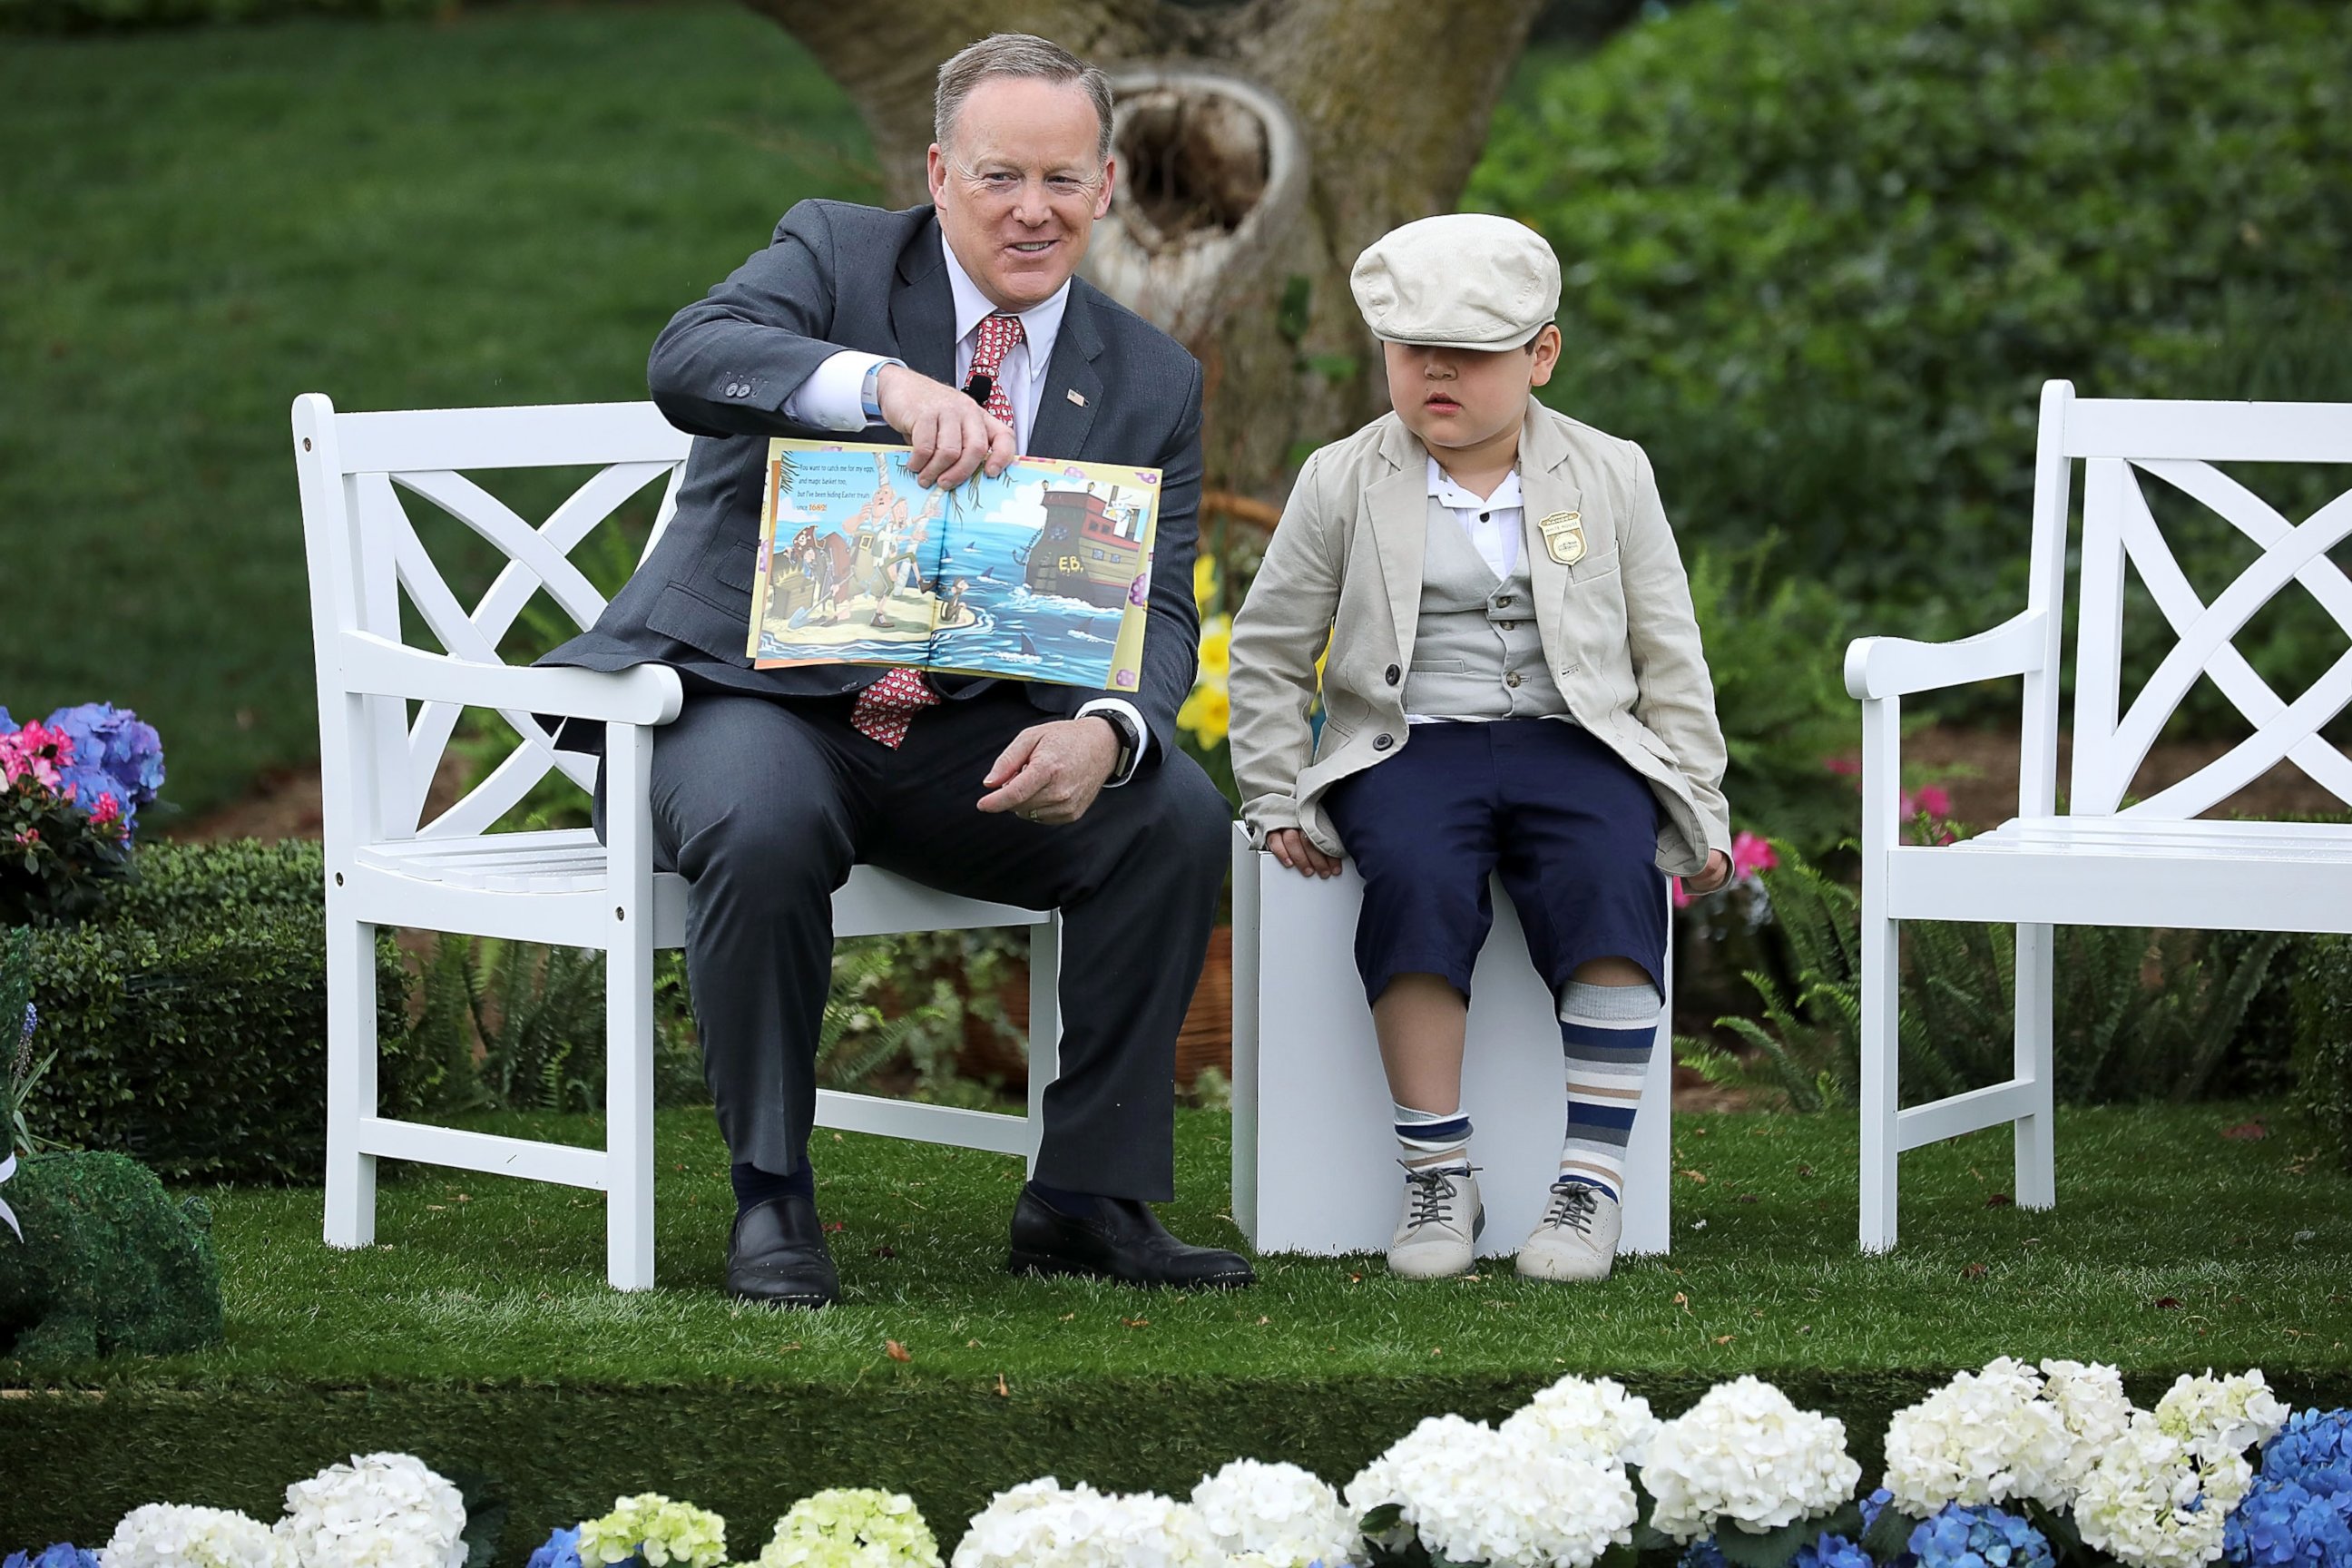 PHOTO: White House press secretary Sean Spicer reads the childrens' book "How To Catch The Easter Bunny" during the 139th Easter Egg Roll on the South Lawn of the White House, April 17, 2017, in Washington.